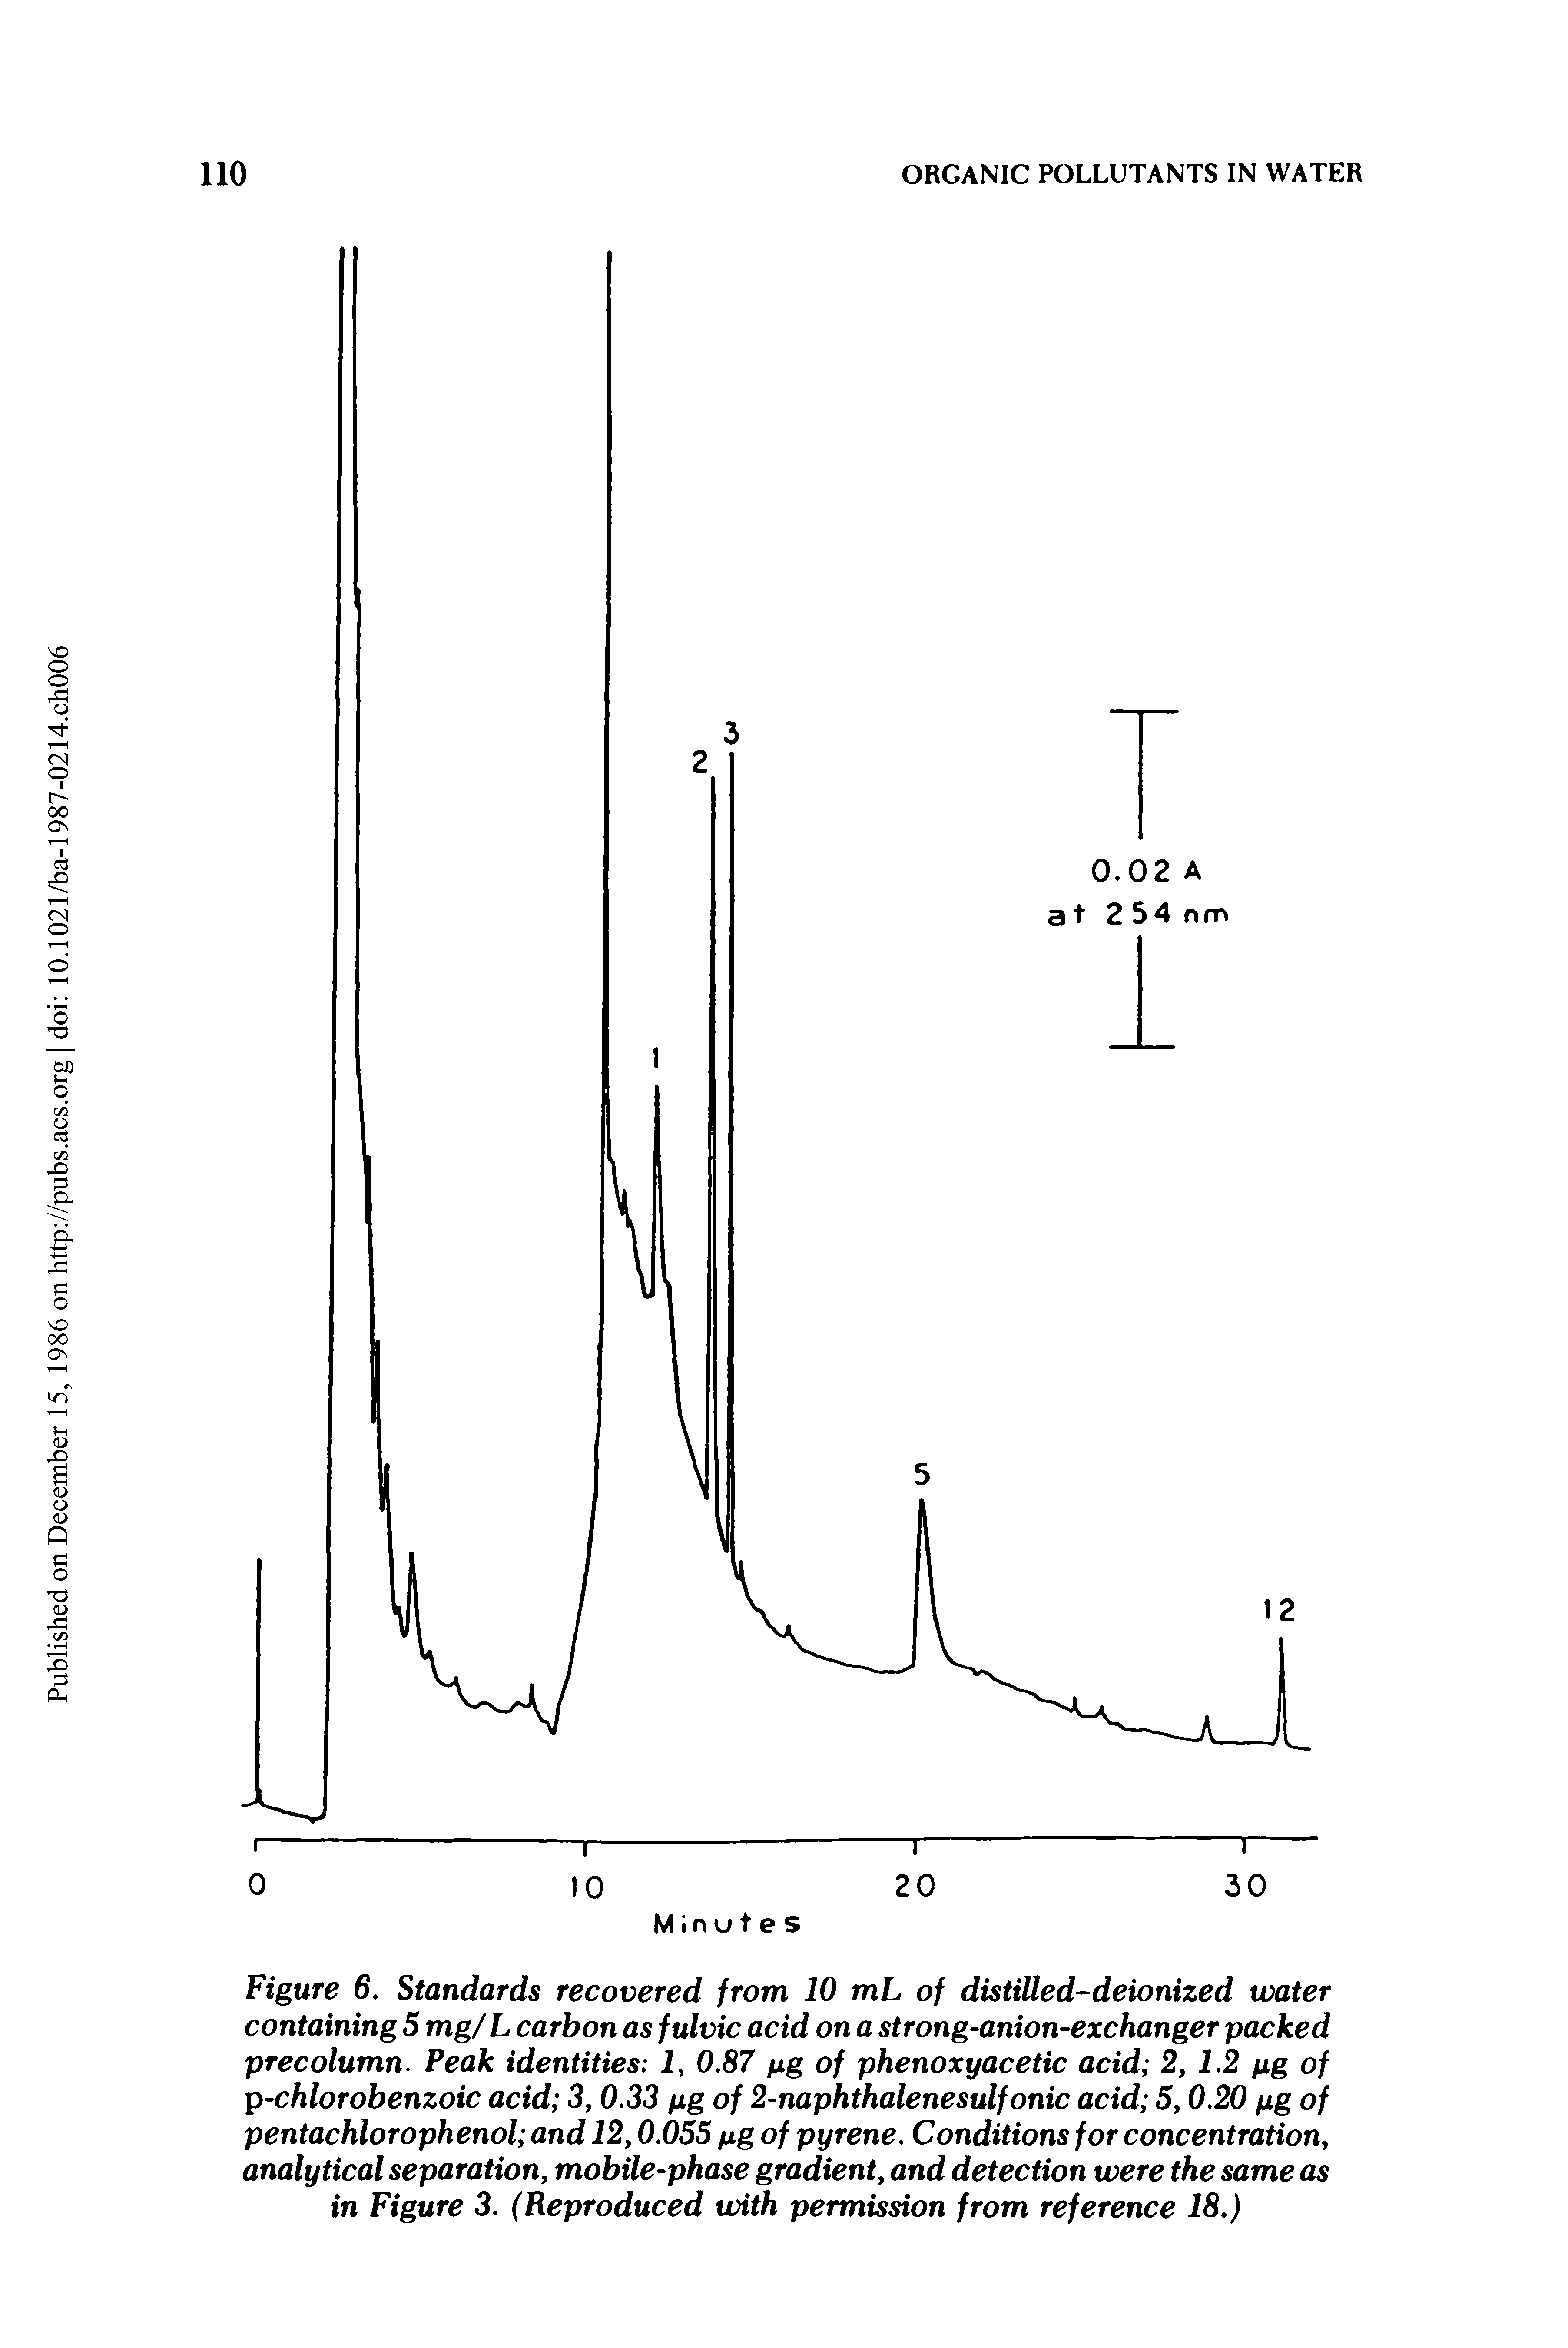 Figure 6. Standards recovered from 10 mL of distiUed-deionized water containing 5 mg/L carbon as fulvic acid on a strong-anion-exchanger packed precolumn. Peak identities 2, 0.87 pg of phenoxyacetic acid 2, 1.2 pg of p-chlorobenzoic acid 3,0.33 pg of 2-naphthalenesulfonic acid 5,0.20 pg of pentachlorophenol and 12,0.055 pg of pyrene. Conditions for concentration, analytical separation, mobile-phase gradient, and detection were the same as in Figure 3. (Reproduced with permission from reference 18.)...